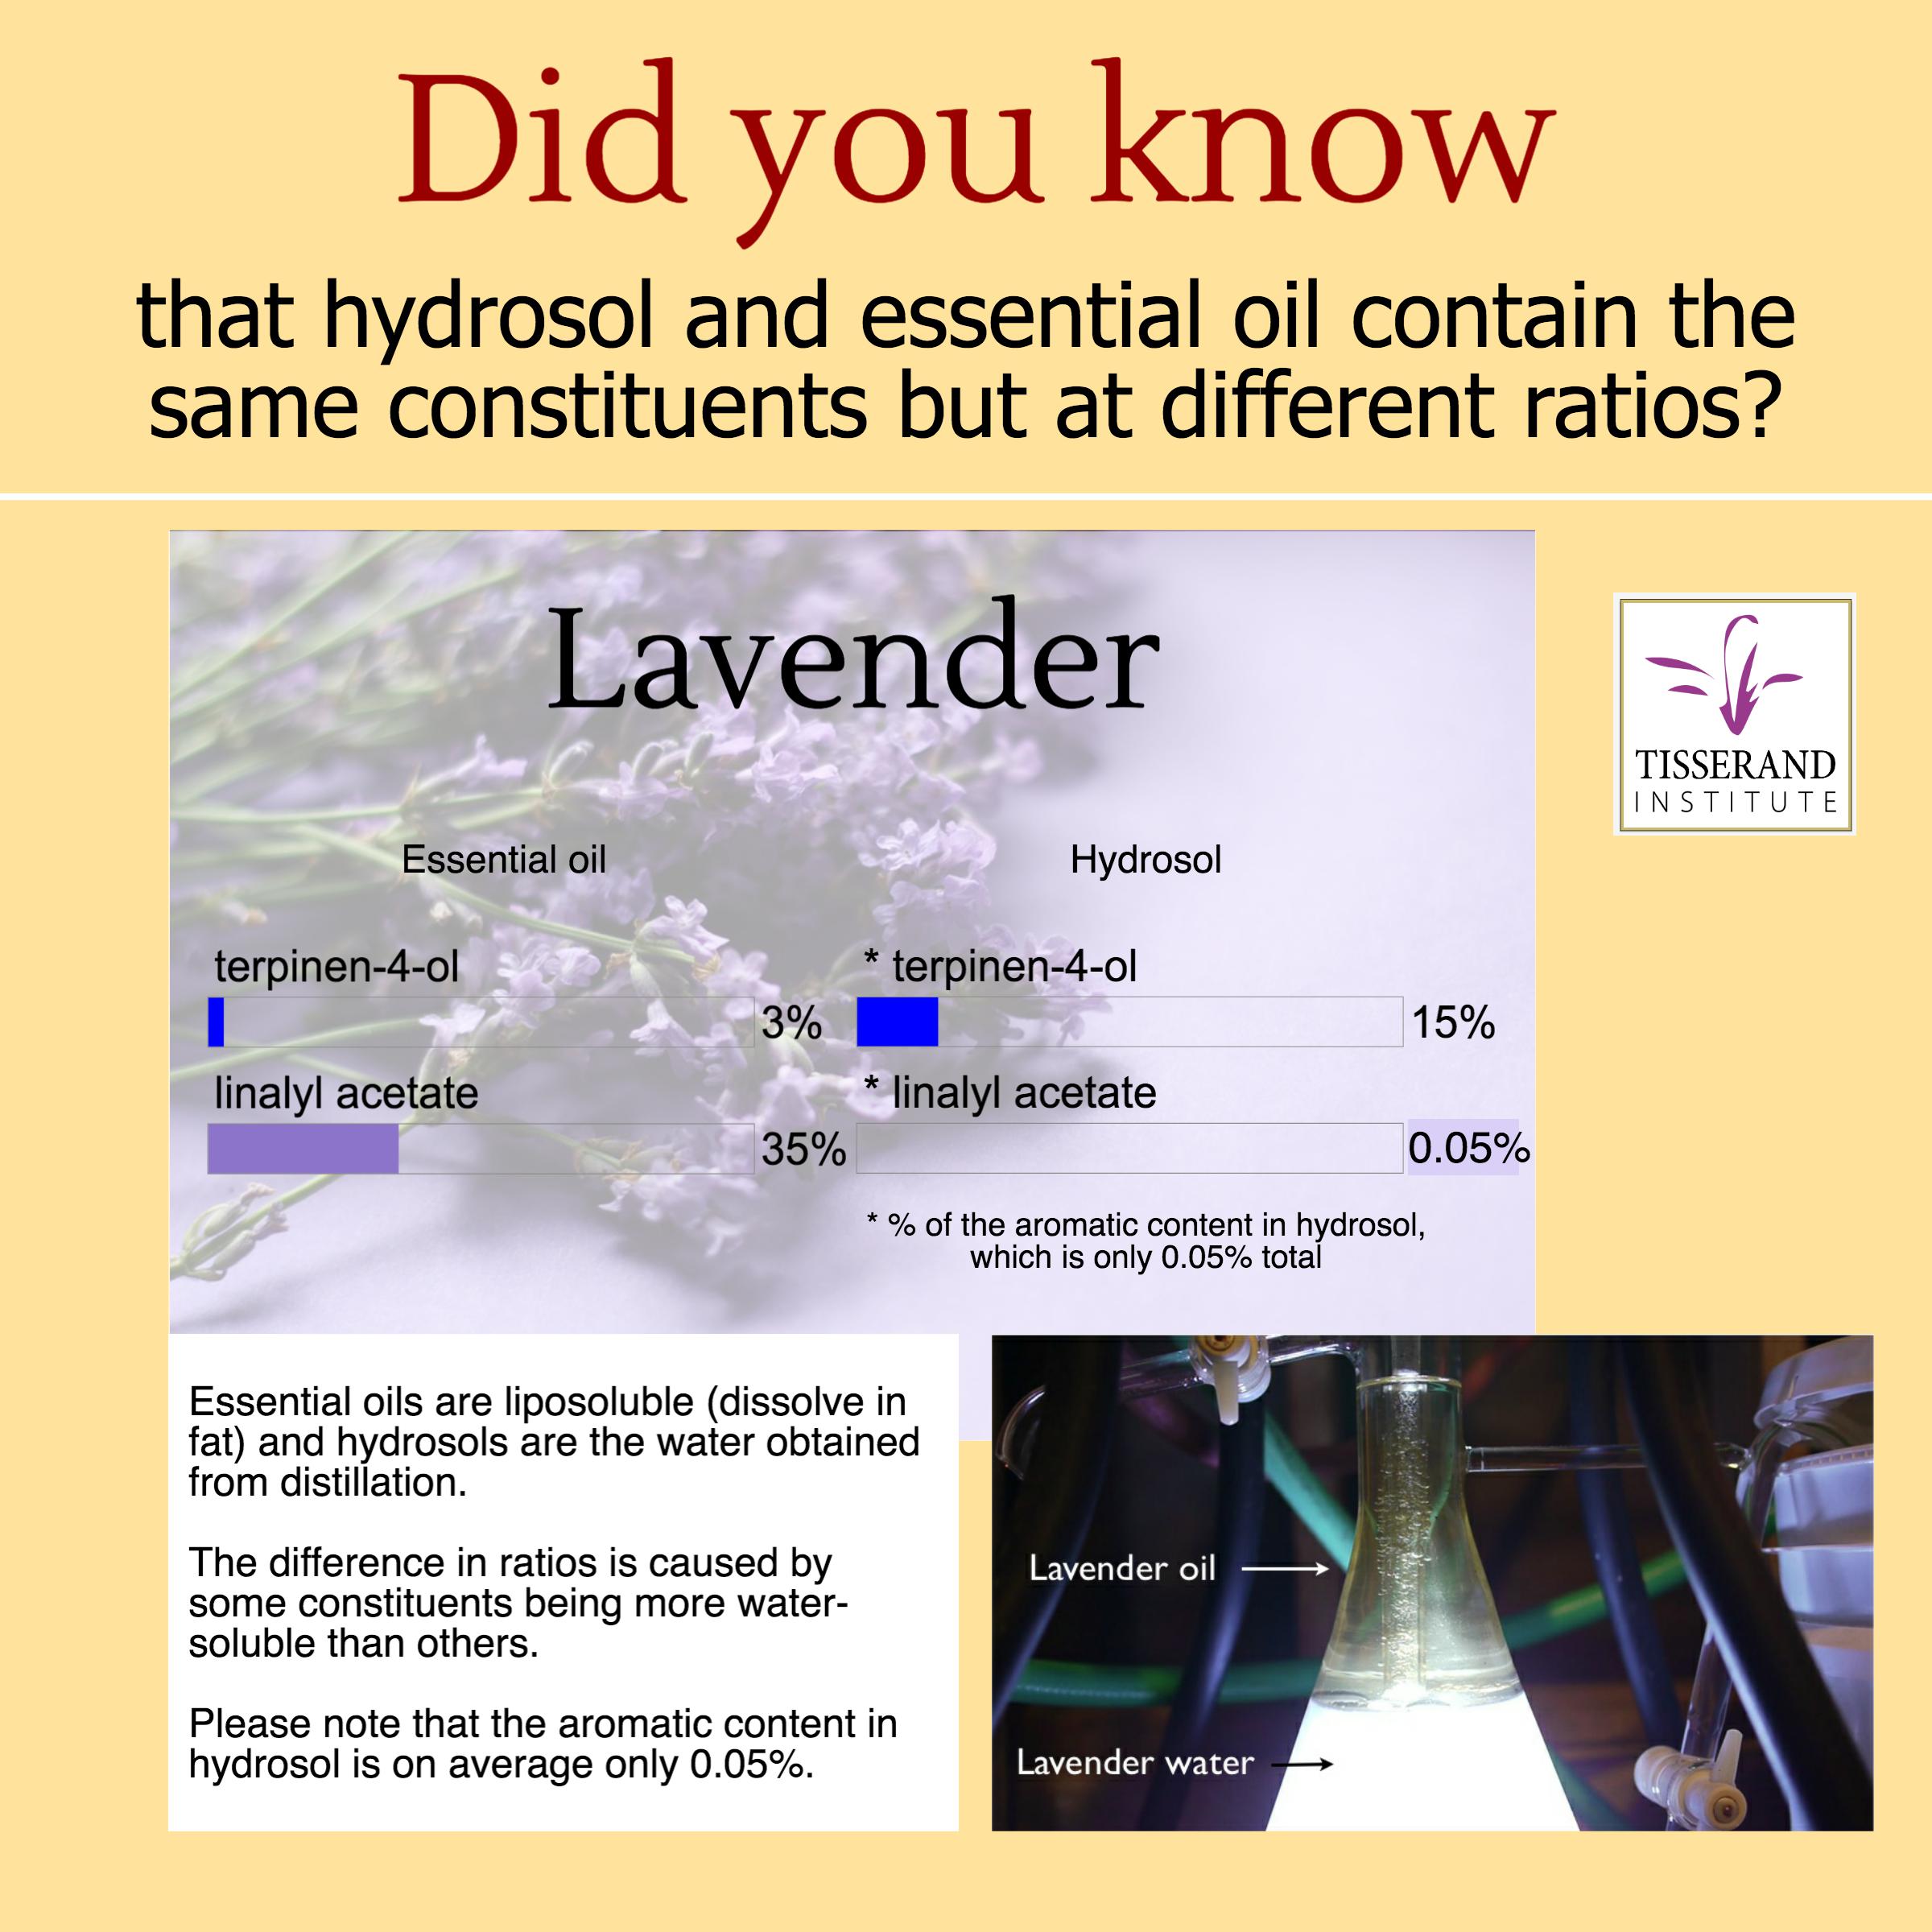 Hydrosol & Essential Oil | Did you know that Hydrosol and Essential Oil Contain the Same Constituents but at Different Ratios?